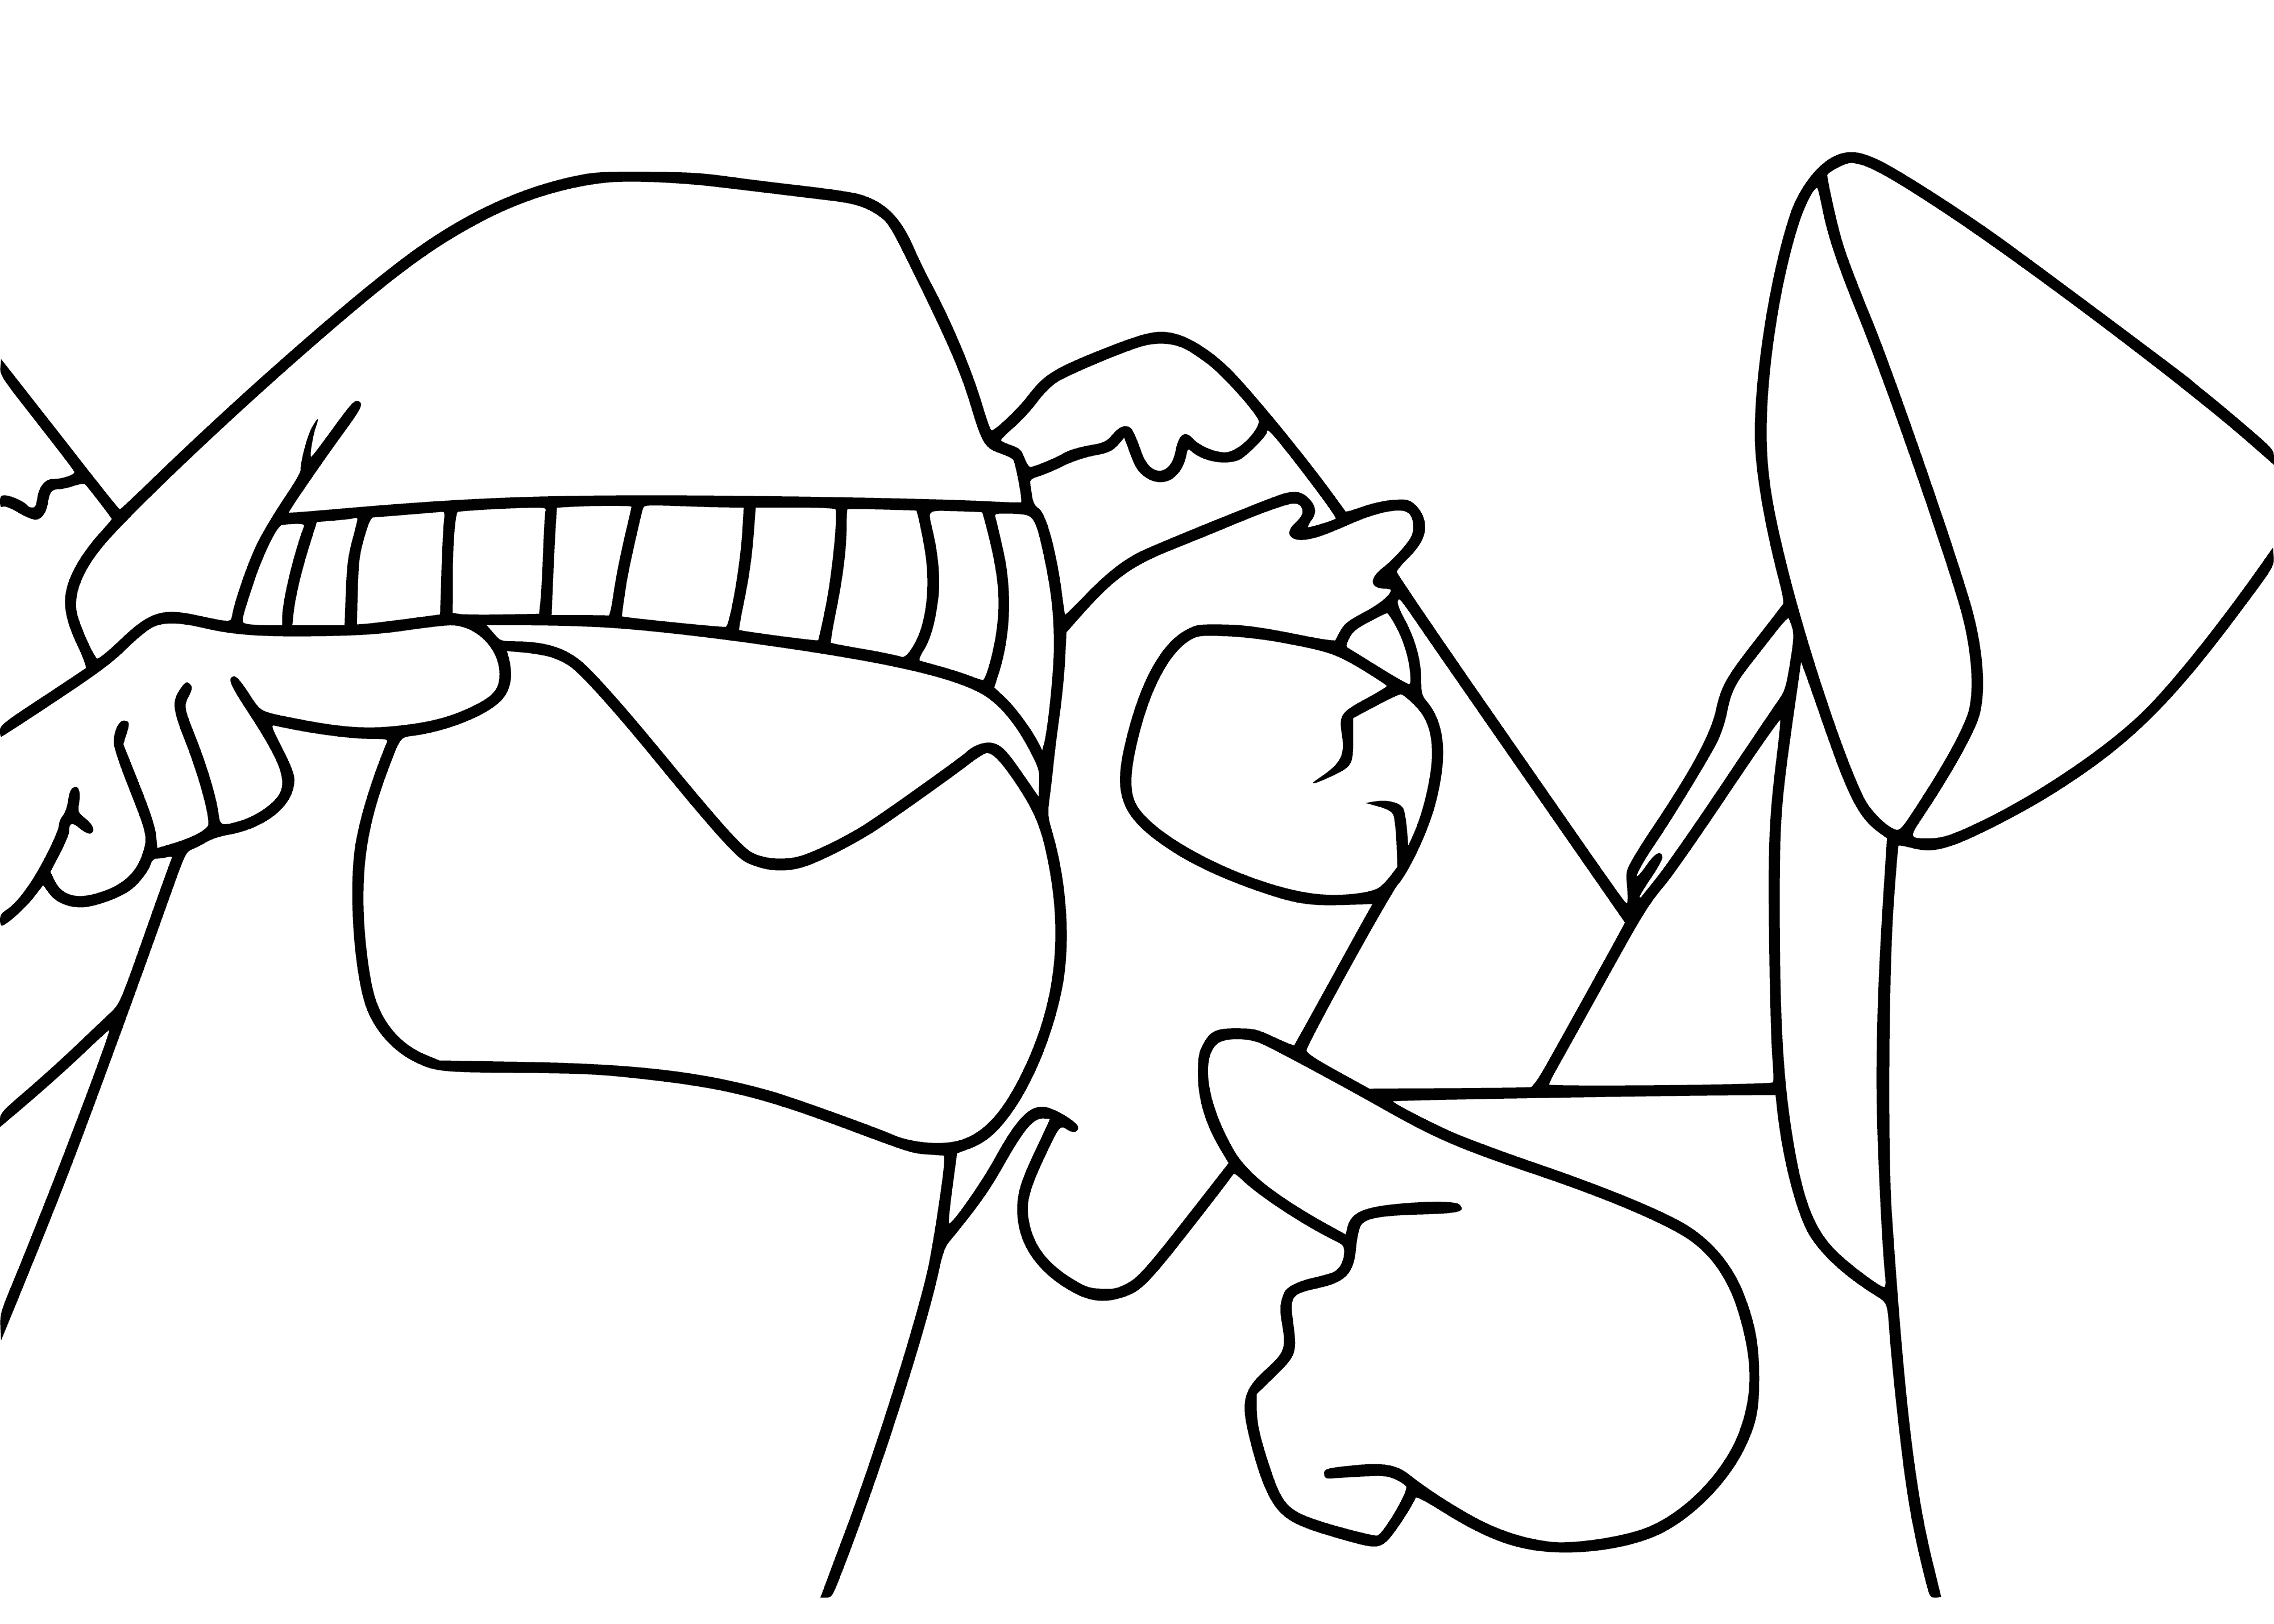 coloring page: Crowd in space suits, holding hands, looking up in awe.